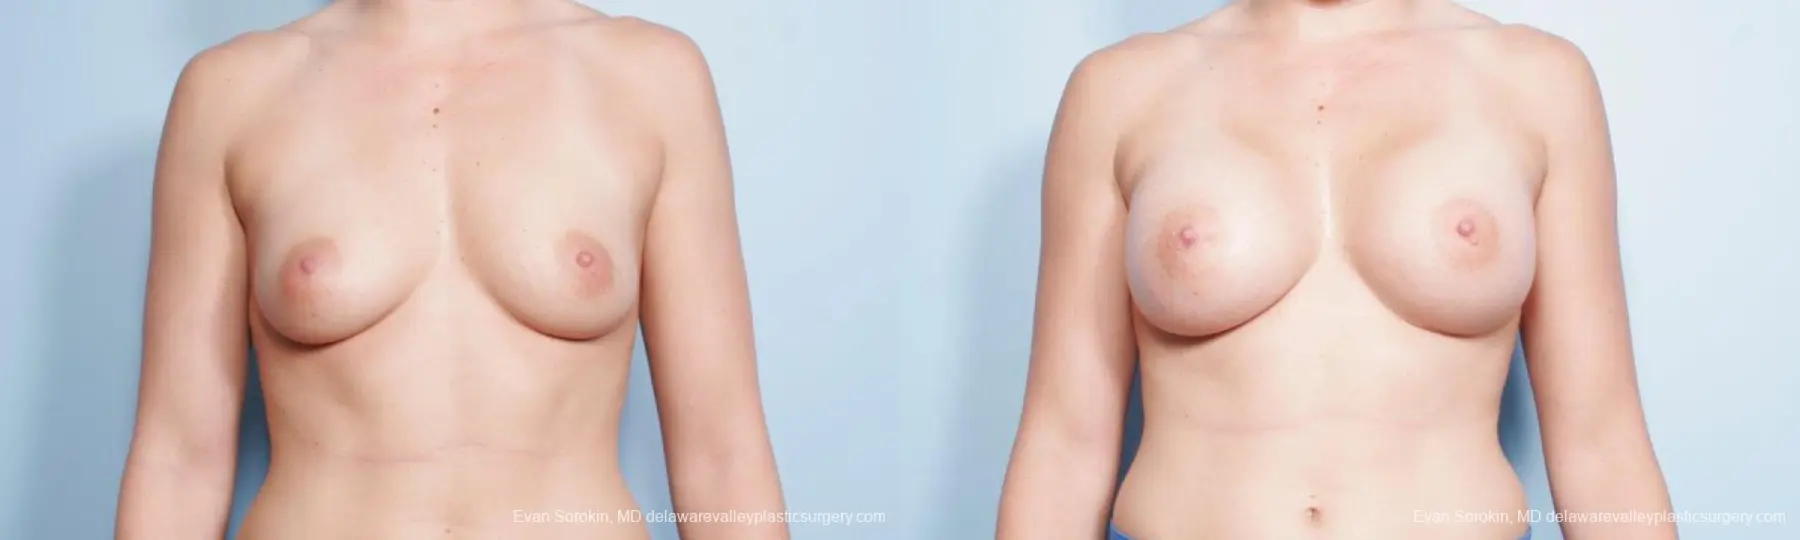 Philadelphia Breast Augmentation 9296 - Before and After 1